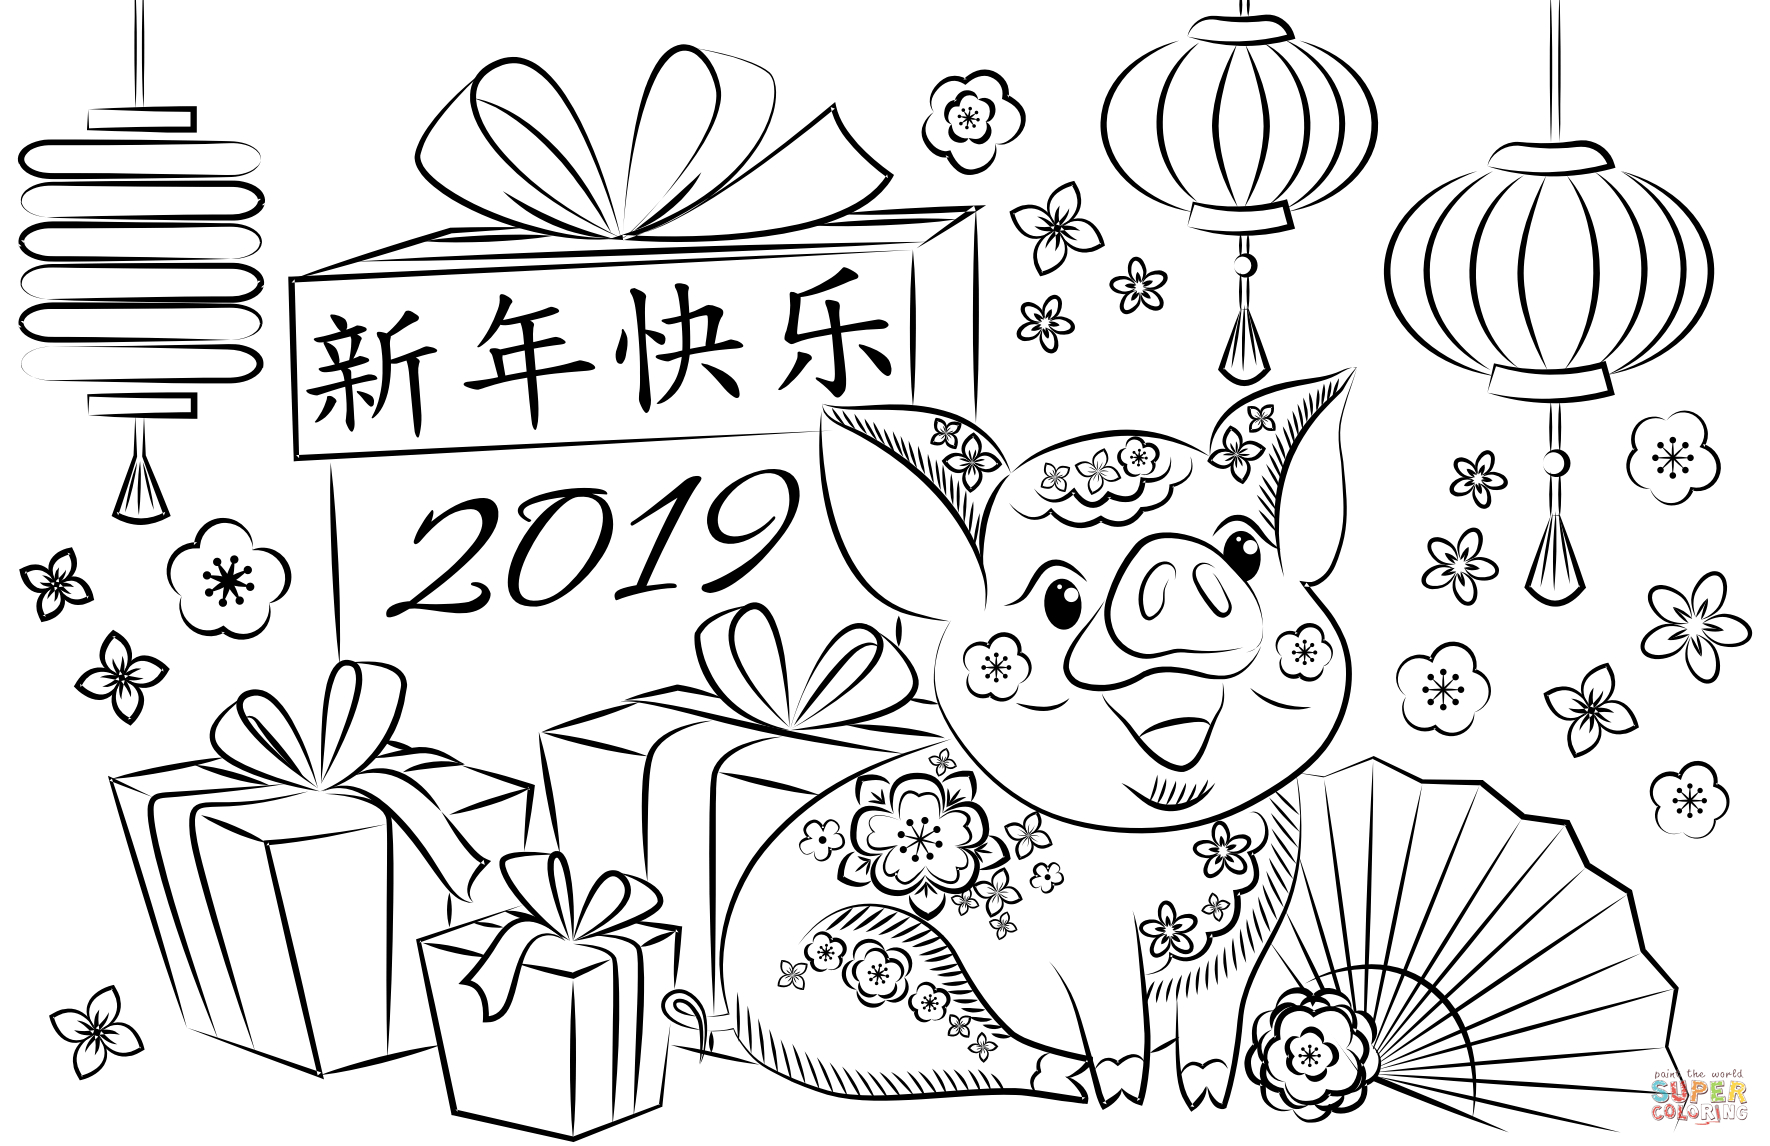 2019 Year Of The Pig Coloring Page | Free Printable Coloring Pages - Pig Coloring Sheets Free Printable